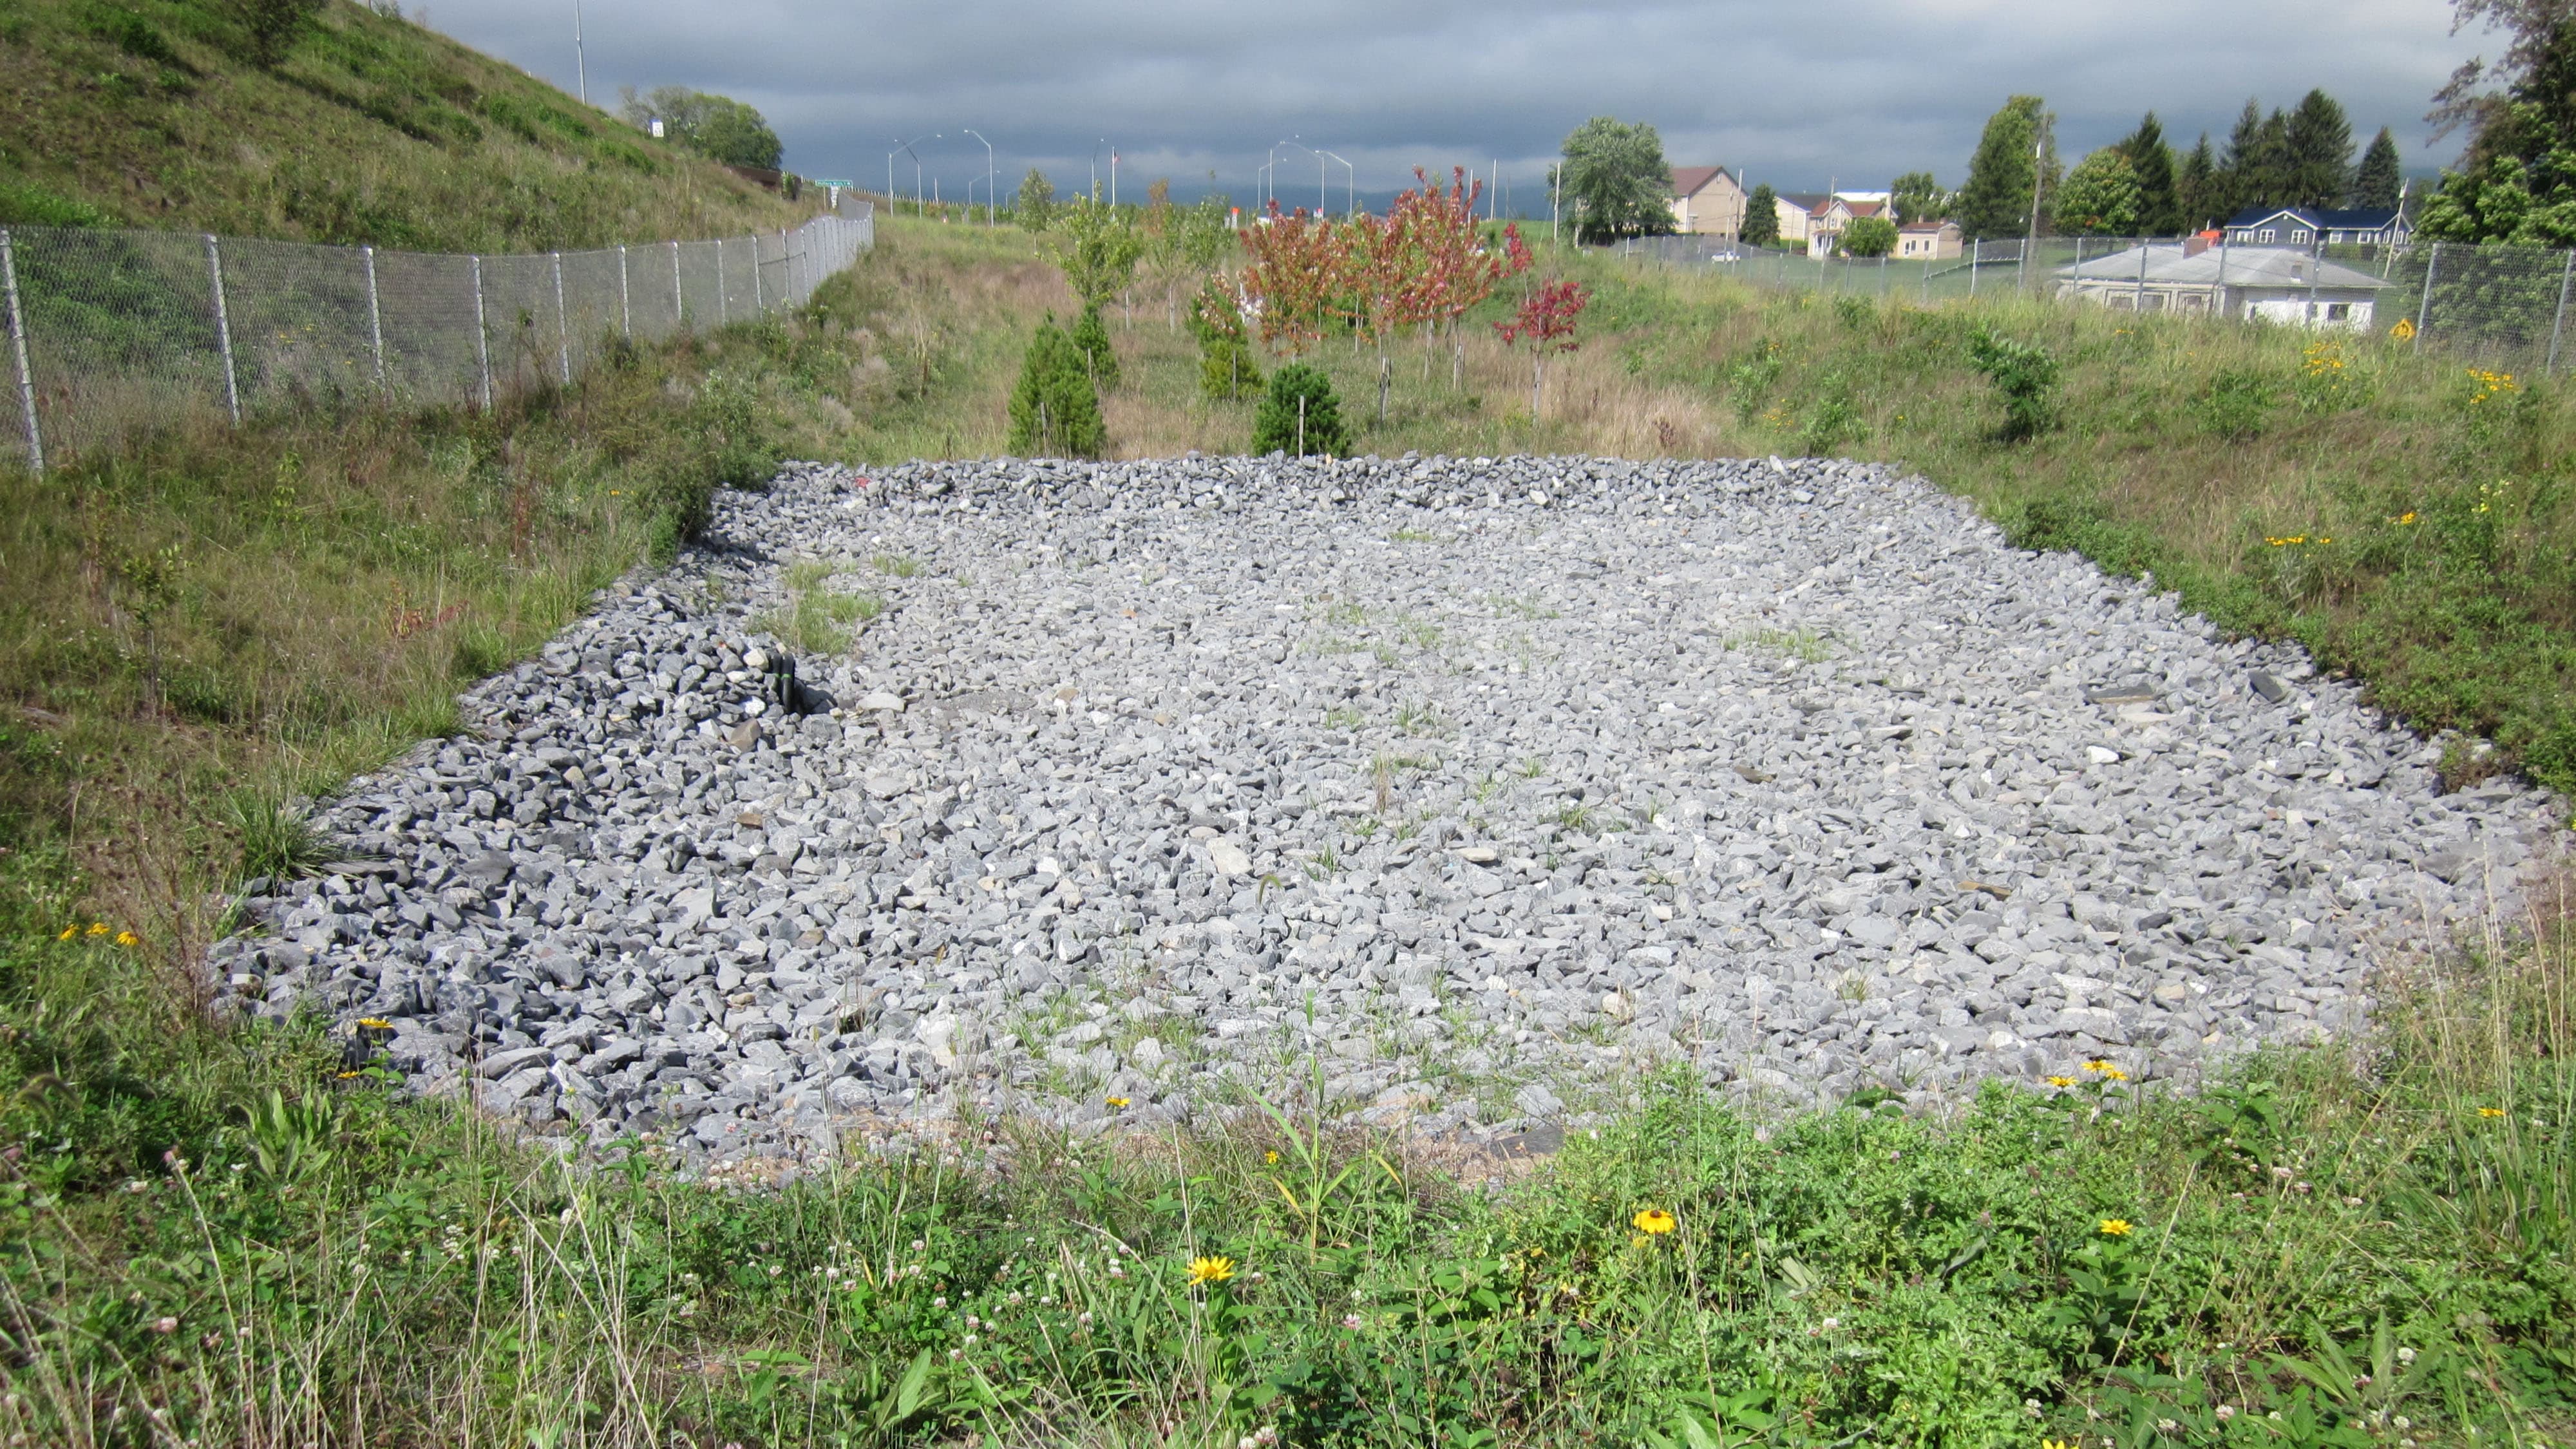 An image of a stormwater runoff area with a large rocky area in the middle to help with drainage